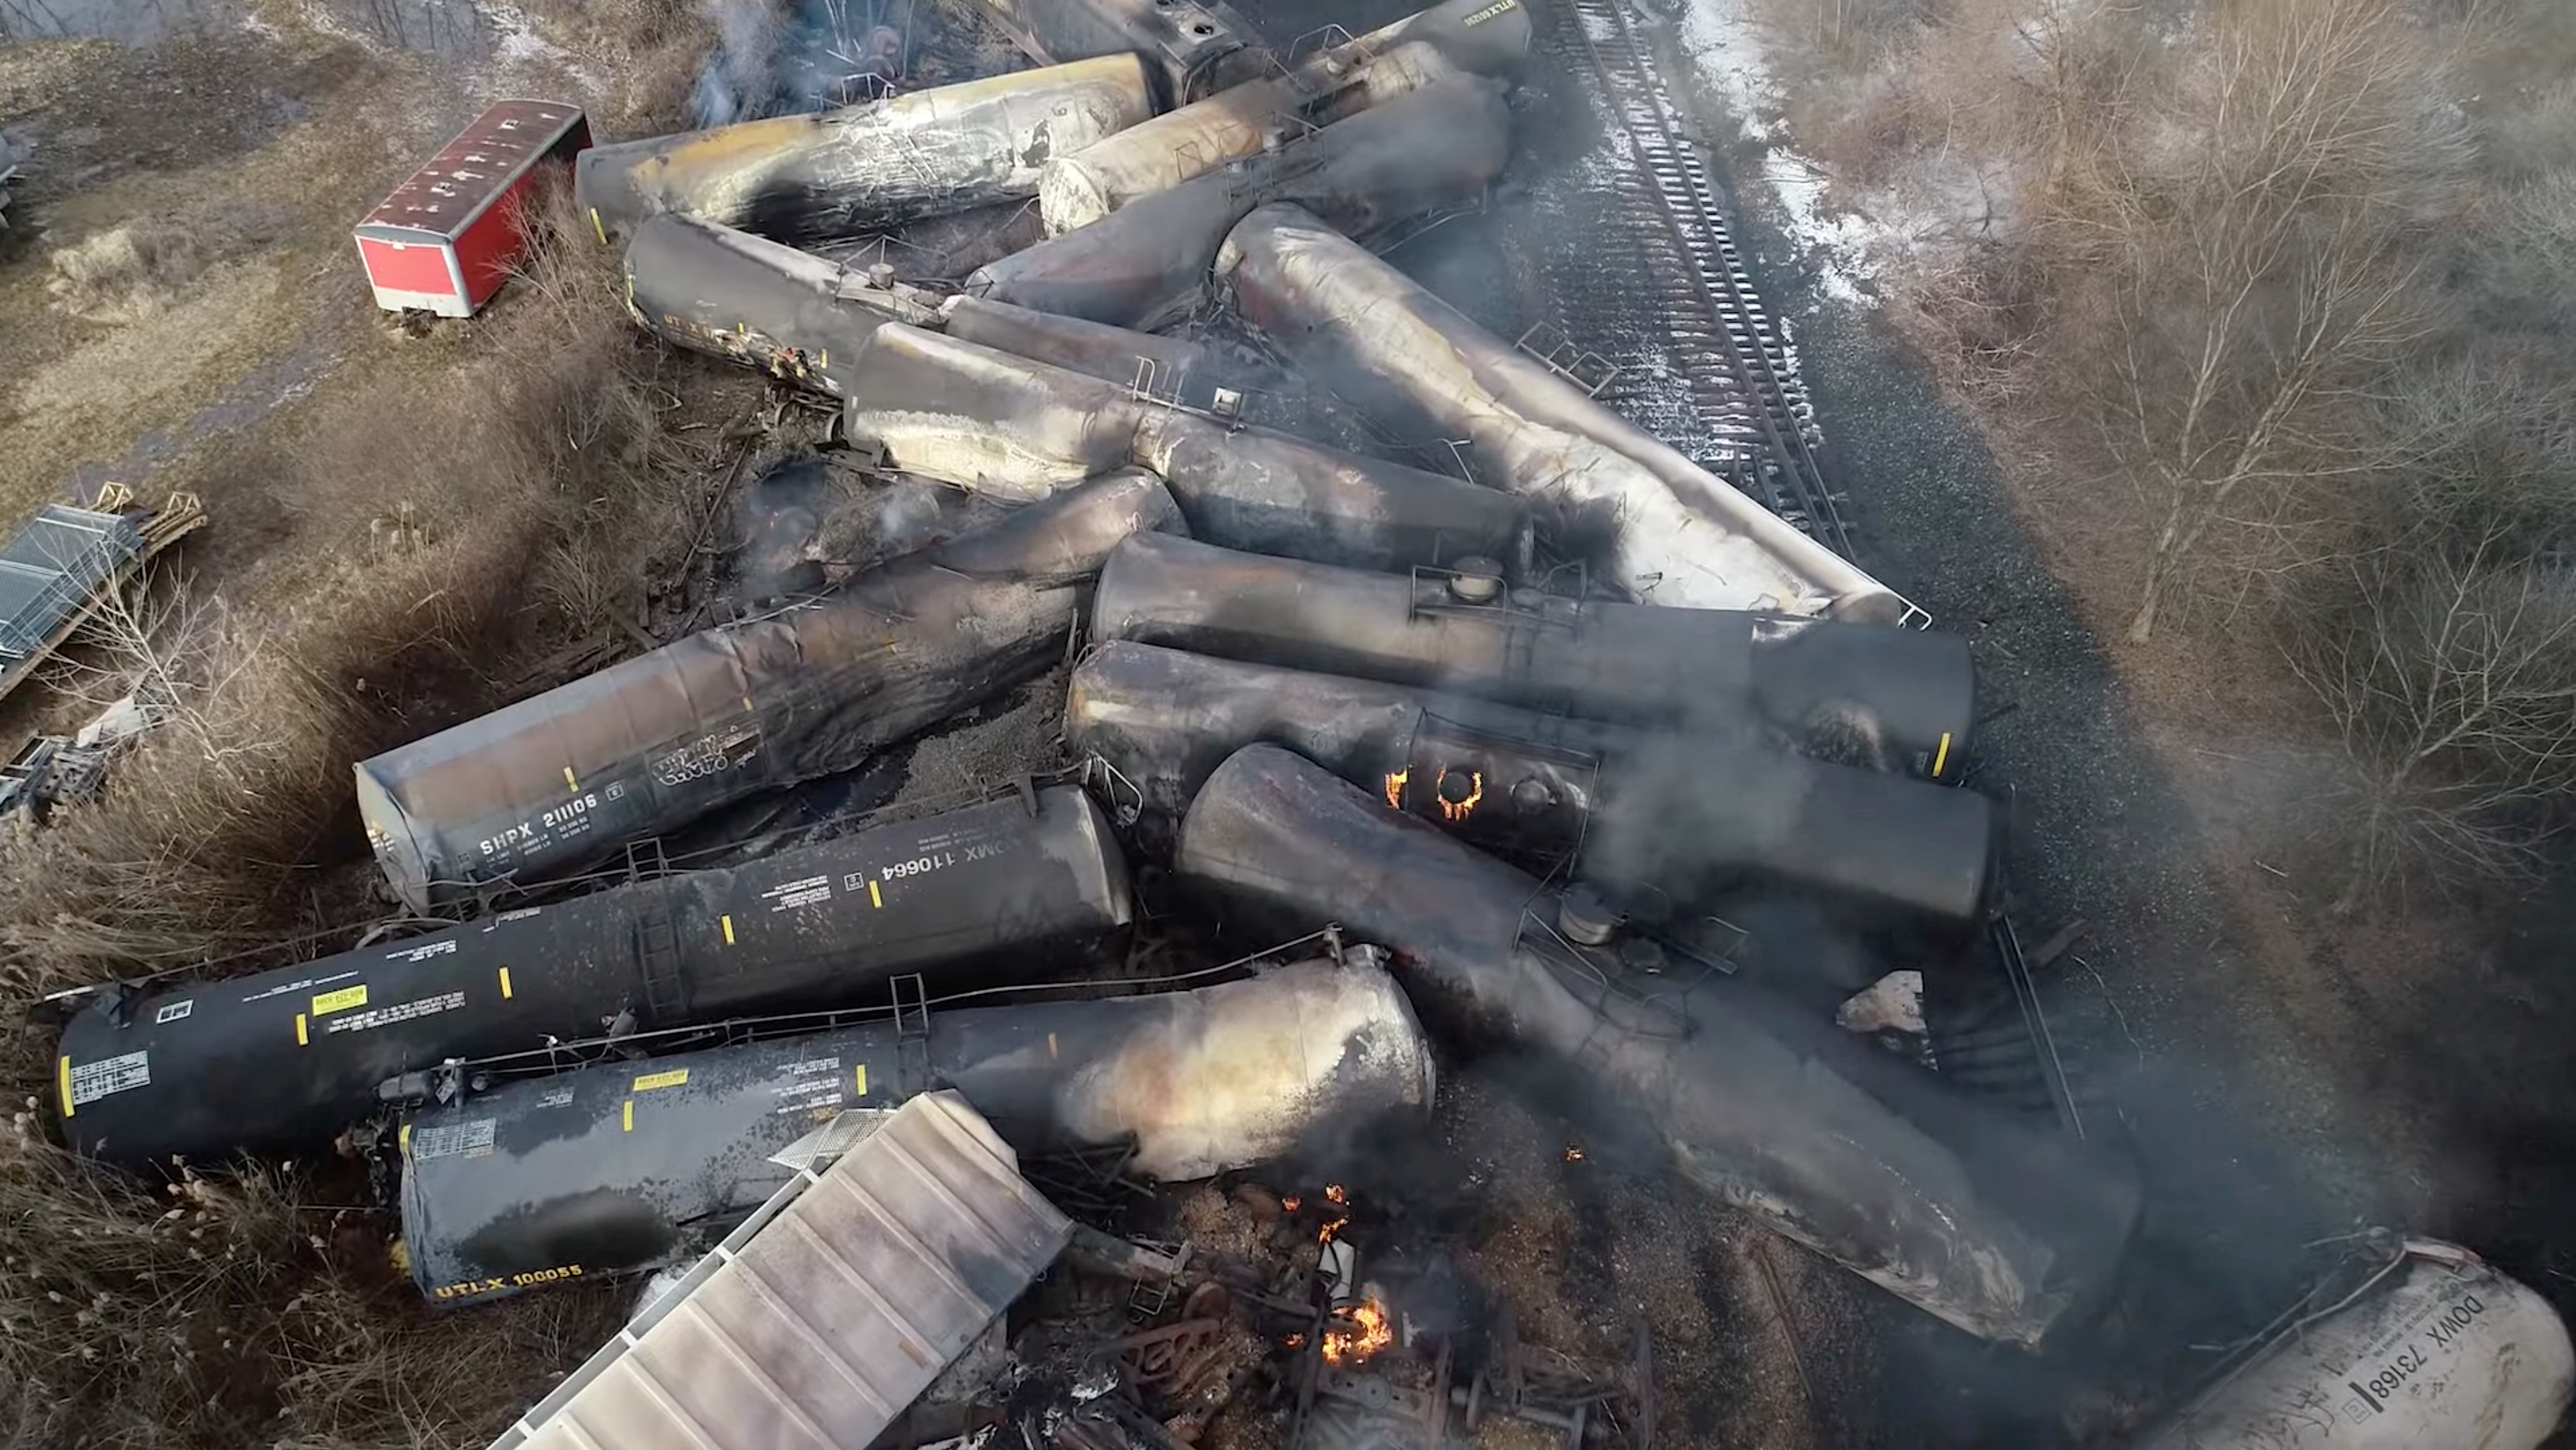 Drone footage shows the freight train derailment in East Palestine, Ohio